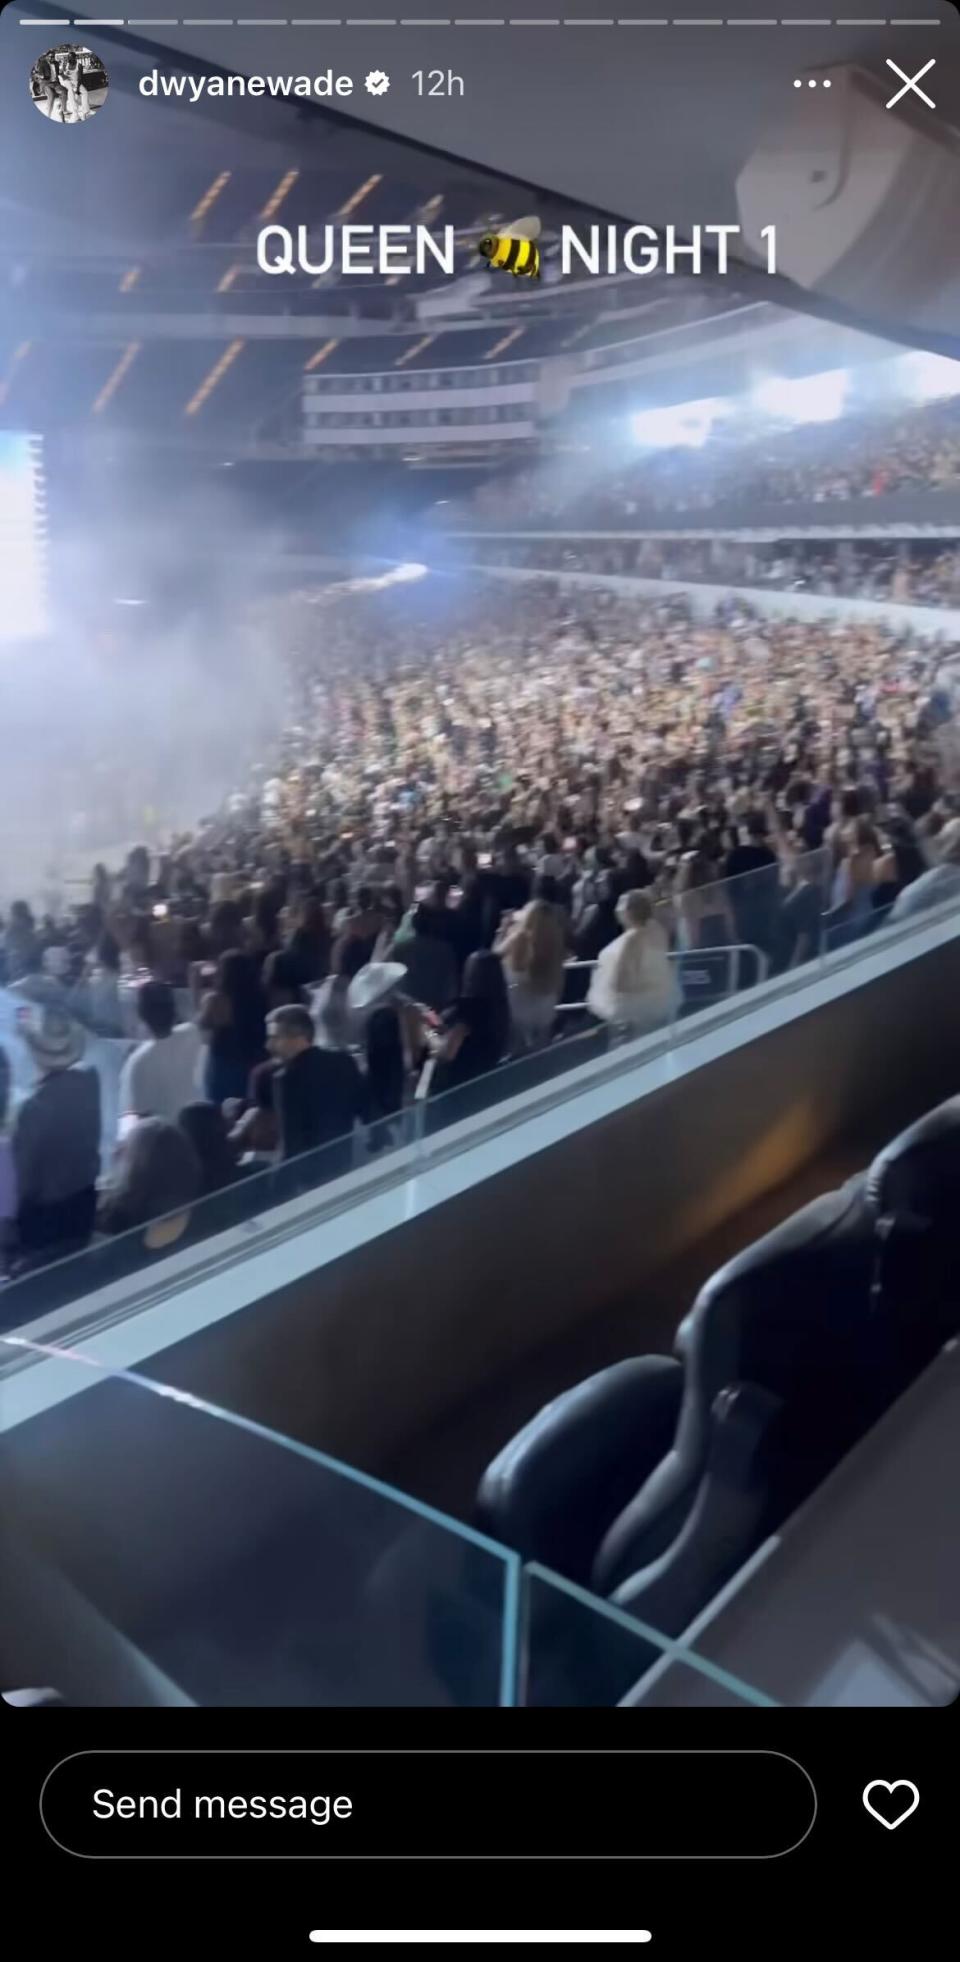 Dwyane Wade shared a photo of the crowd at Beyonce's LA concert. (@dwyanewade on Instagram)